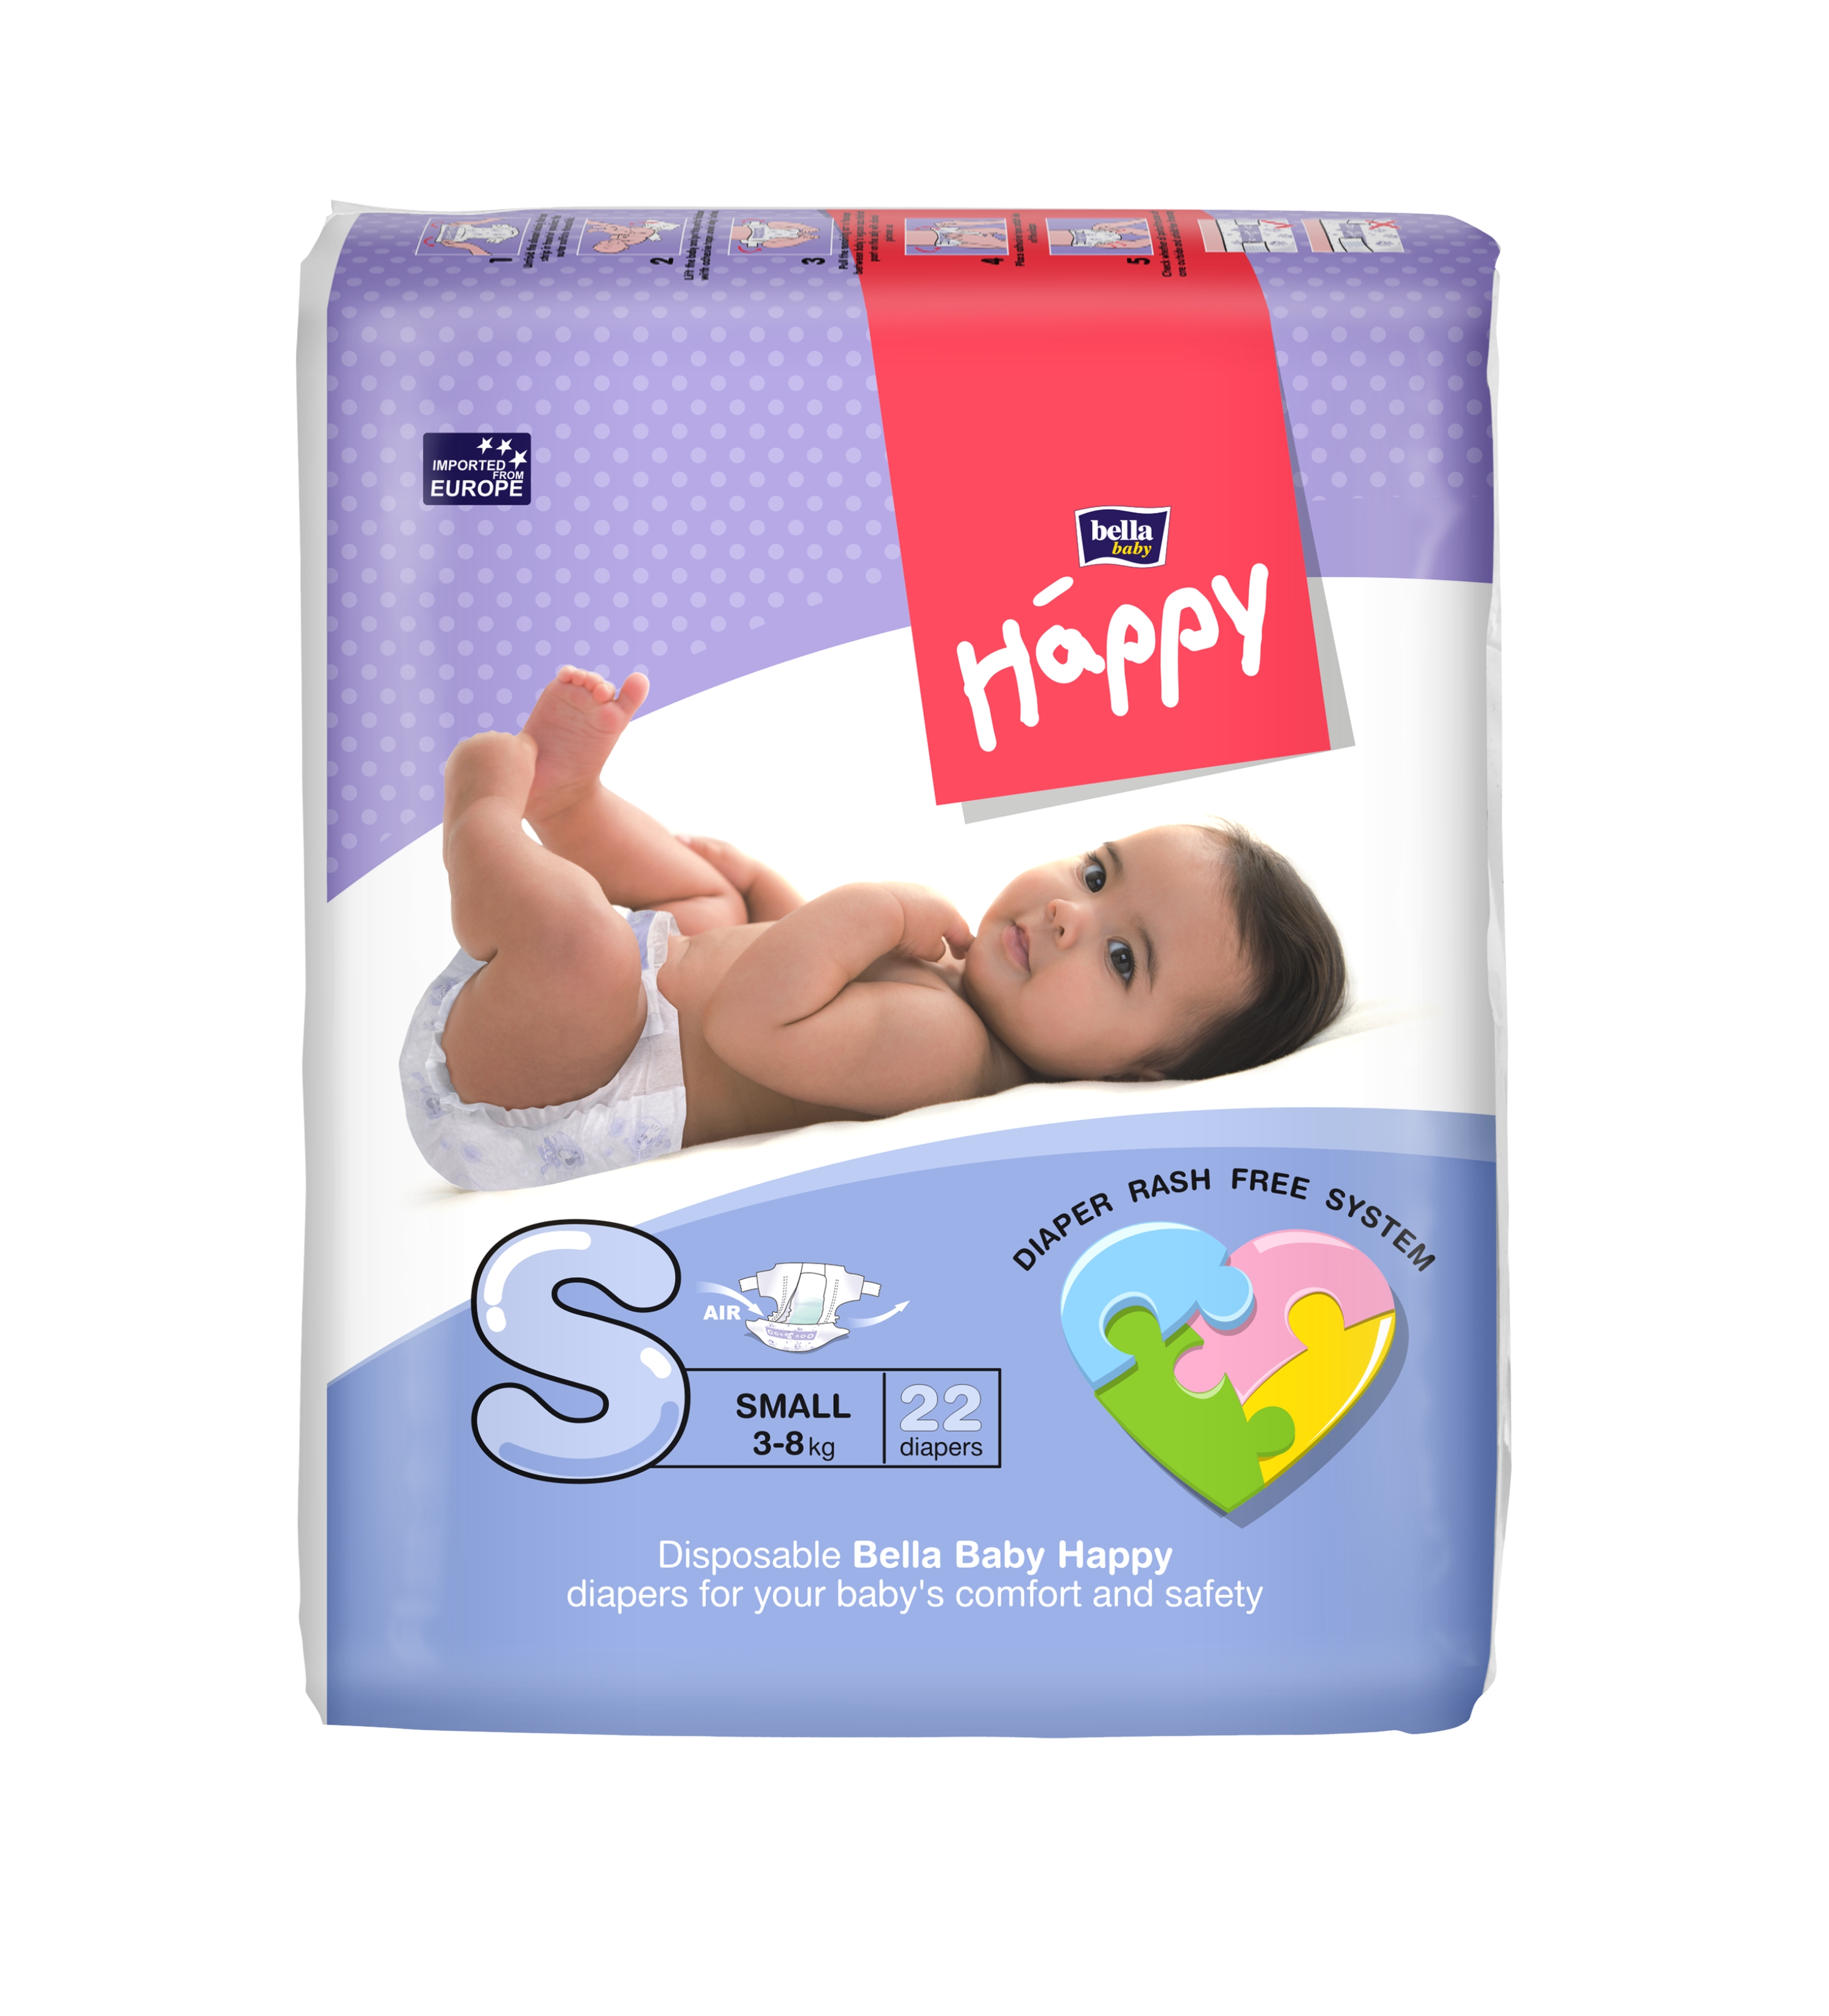 BELLA BABY HAPPY DIAPERS SMALL 22 PCS